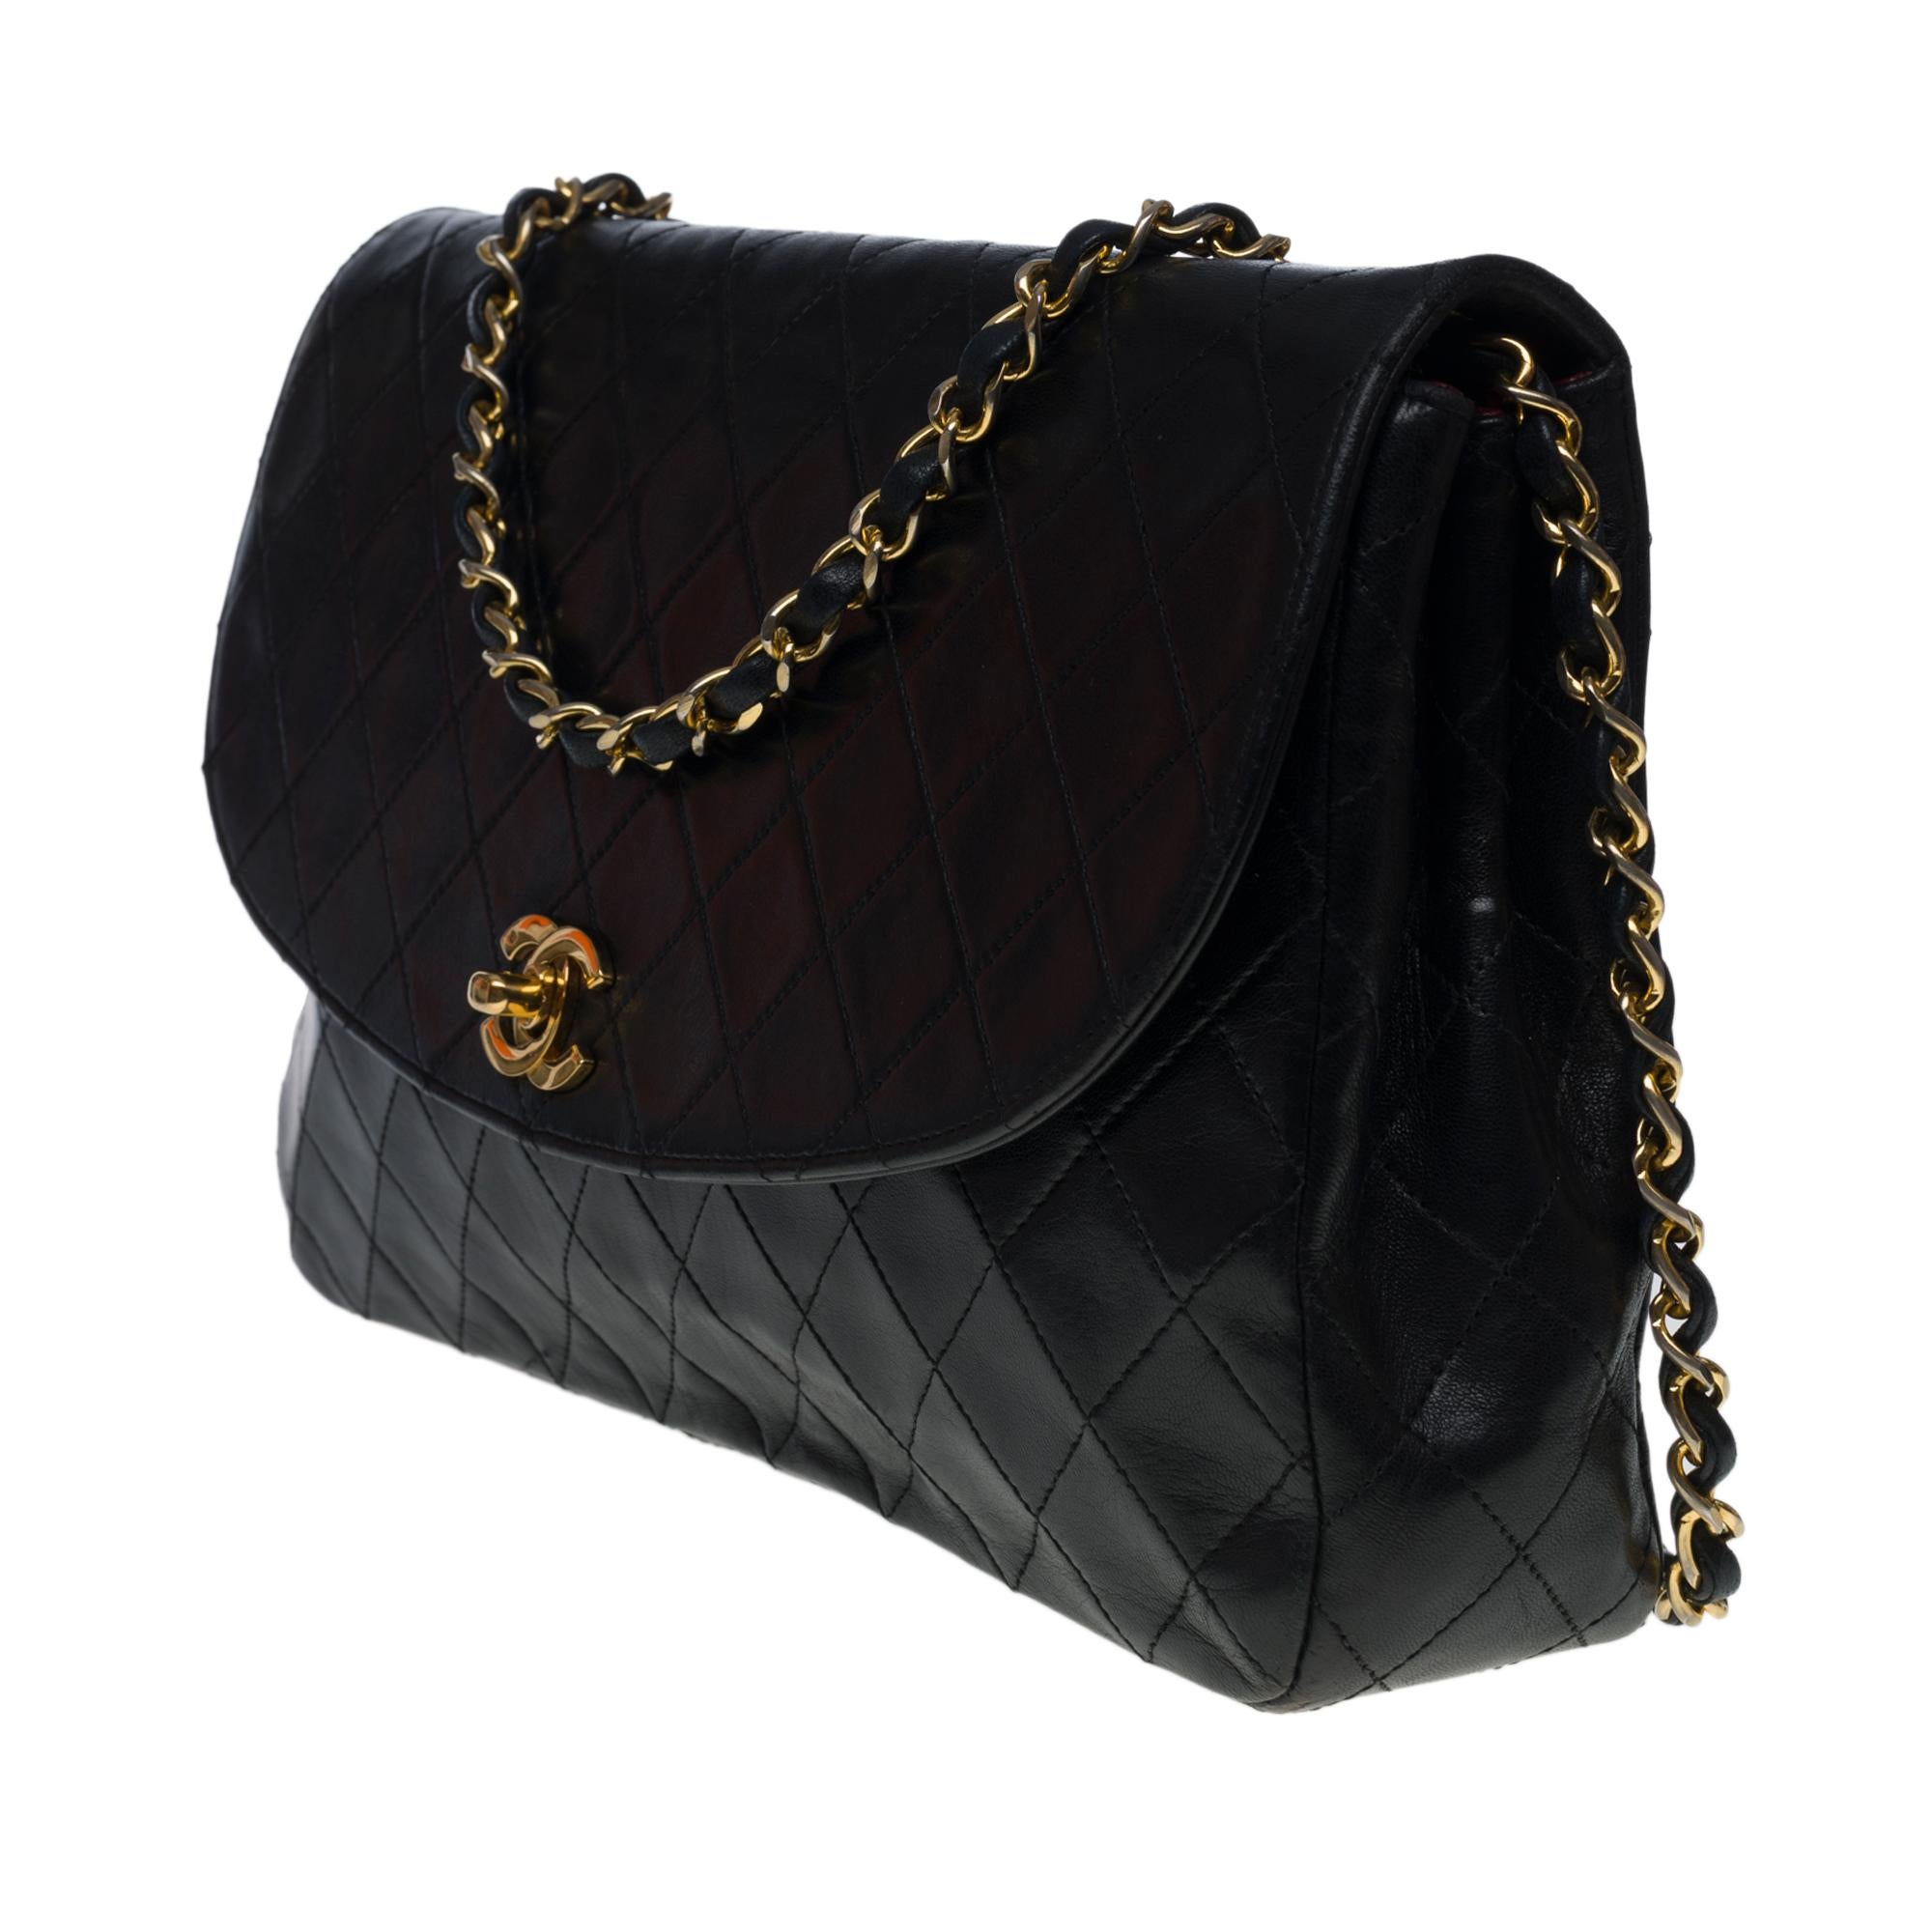 Black Chanel Classic Flap shoulder bag in black quilted lambskin, GHW